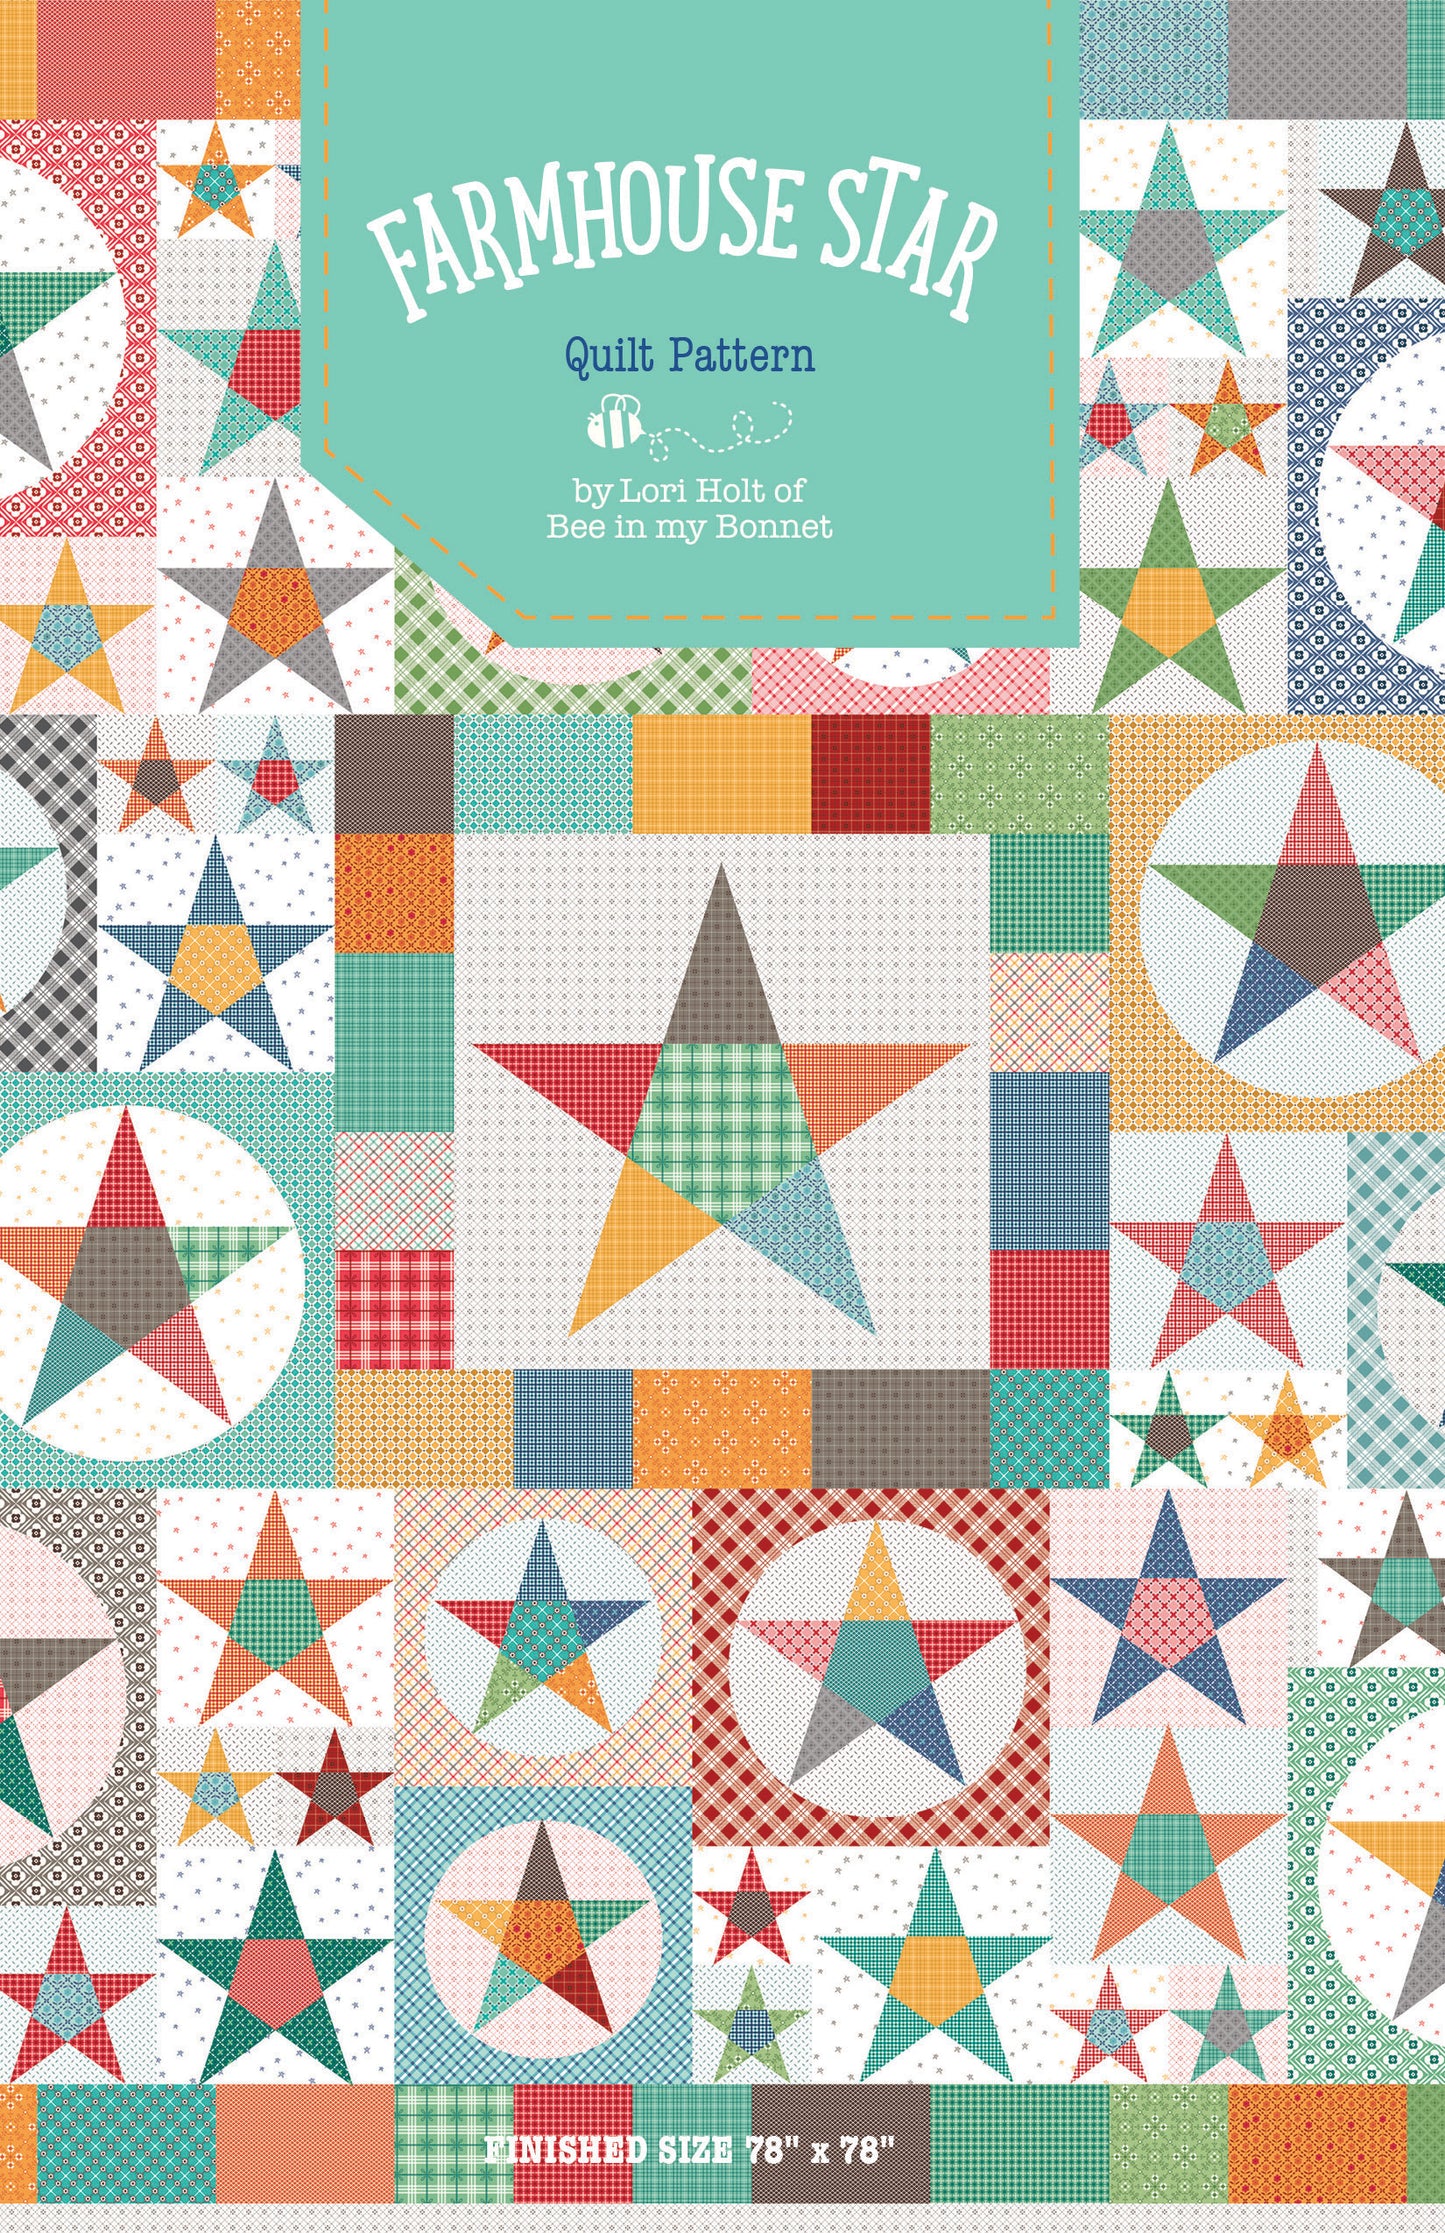 Farmhouse Star Quilt Kit featuring Bee Plaids by Lori Holt